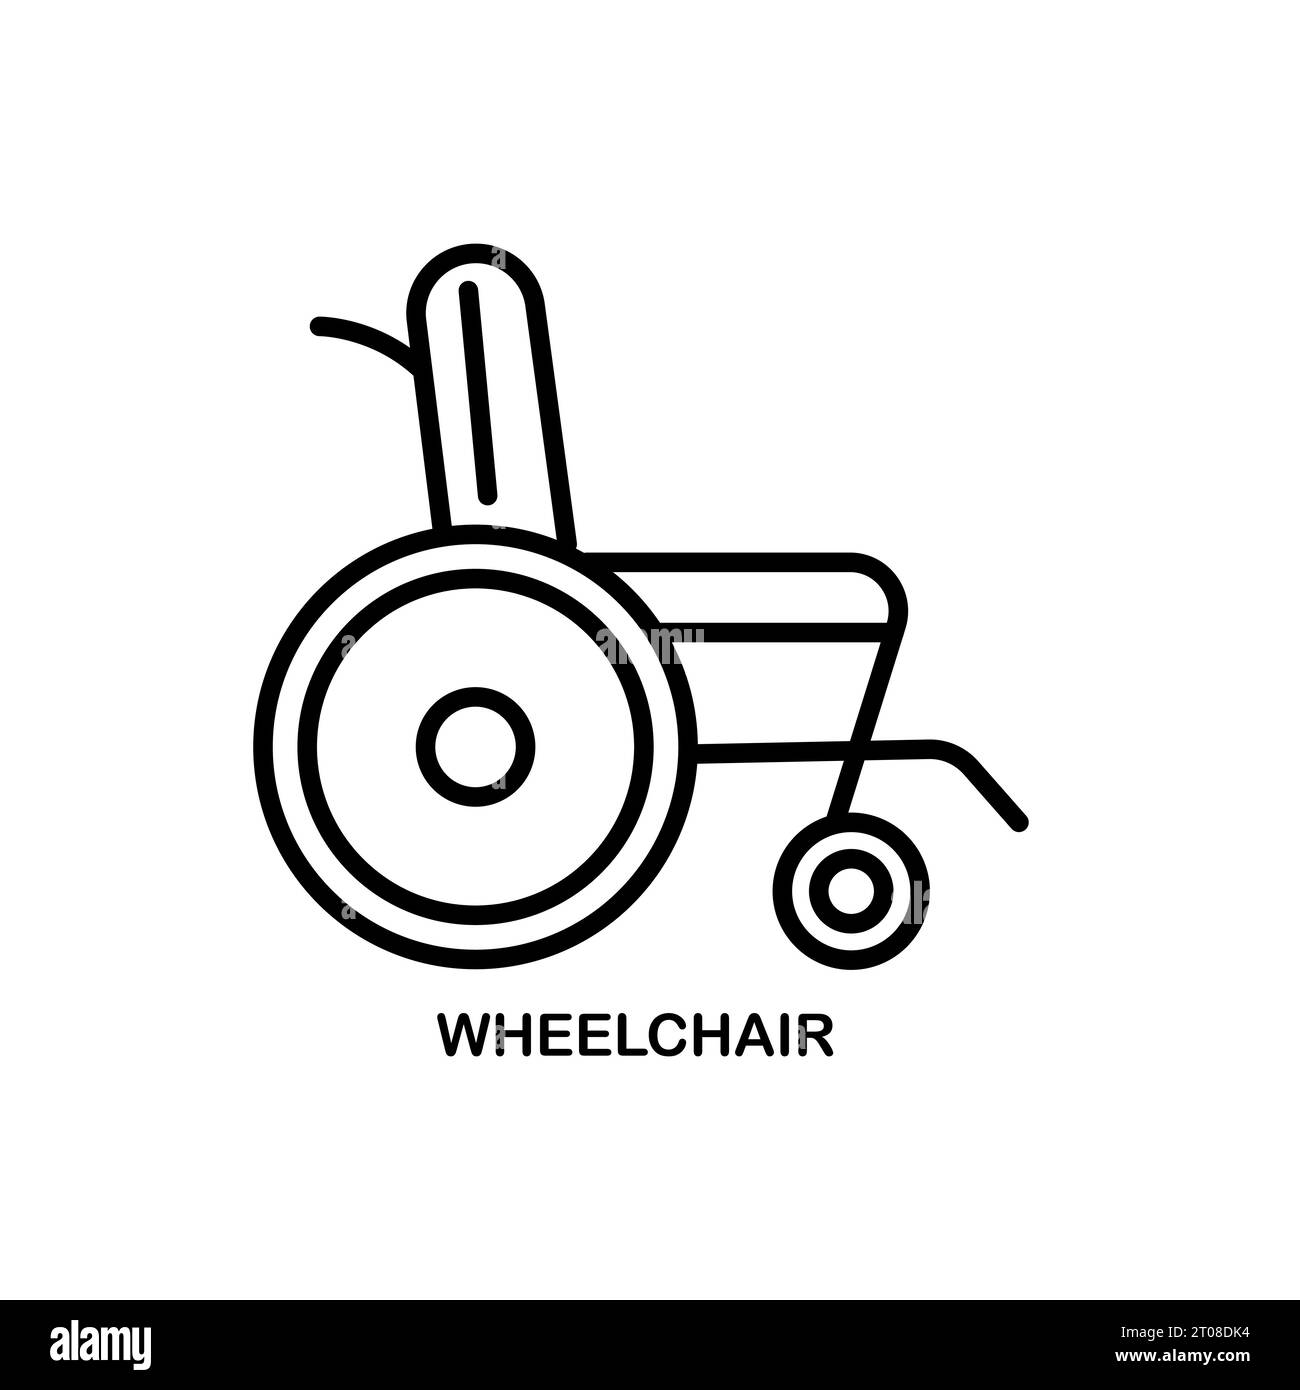 Wheelchair linear icon. Modern outline Wheelchair logo concept on white background from Health and Medical collection. Suitable for use on web apps, m Stock Vector